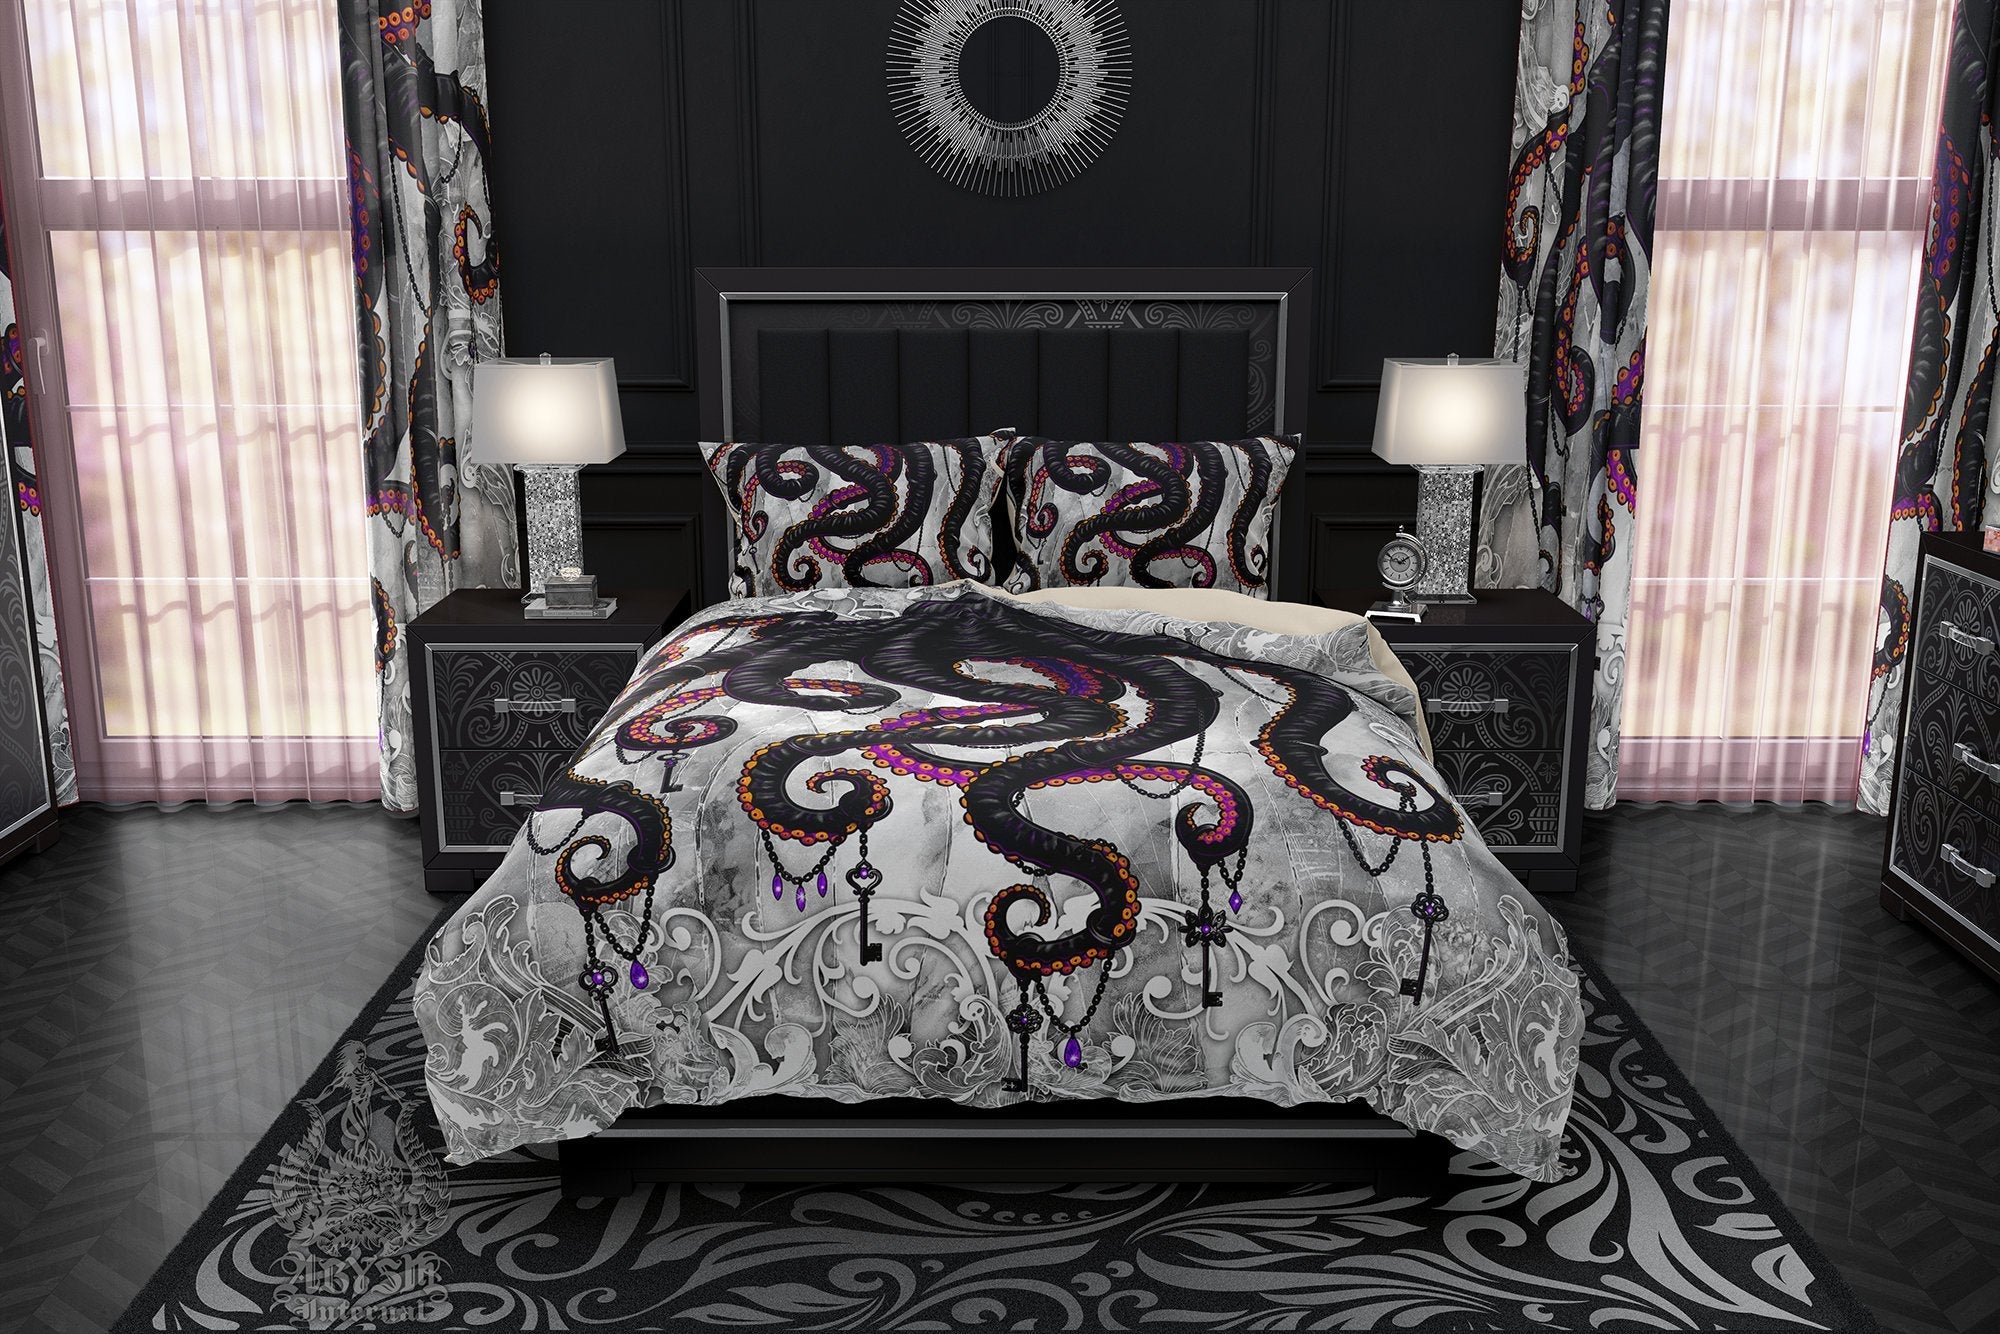 Octopus Bedding Set, Comforter and Duvet, Gothic Bed Cover, Coastal Bedroom Decor, King, Queen and Twin Size - Black and White Goth - Abysm Internal